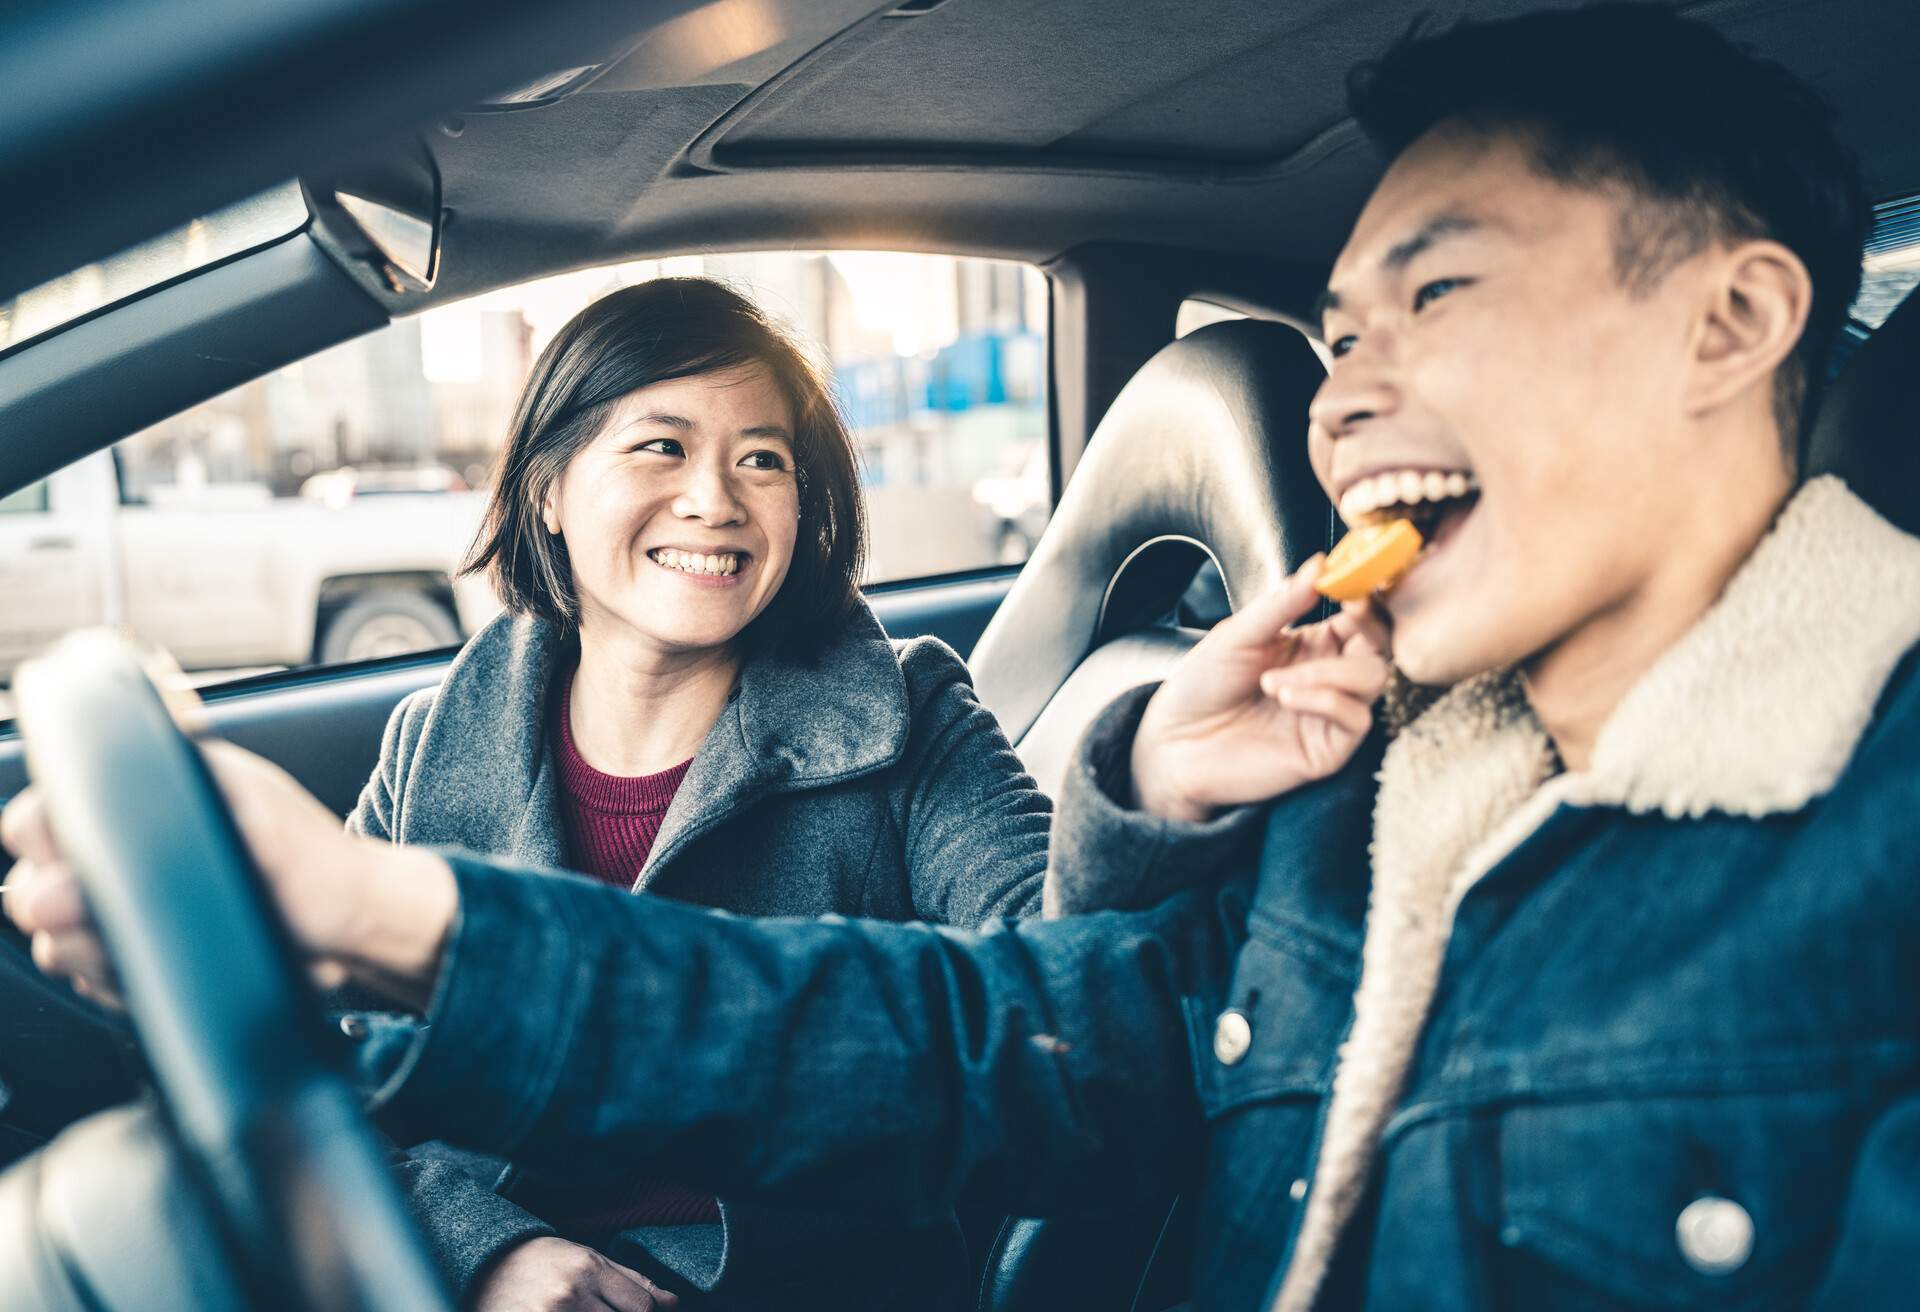 theme_car_roadtrip_people_friends_couple_food_gettyimages-1196246651_universal_within-usage-period_83130